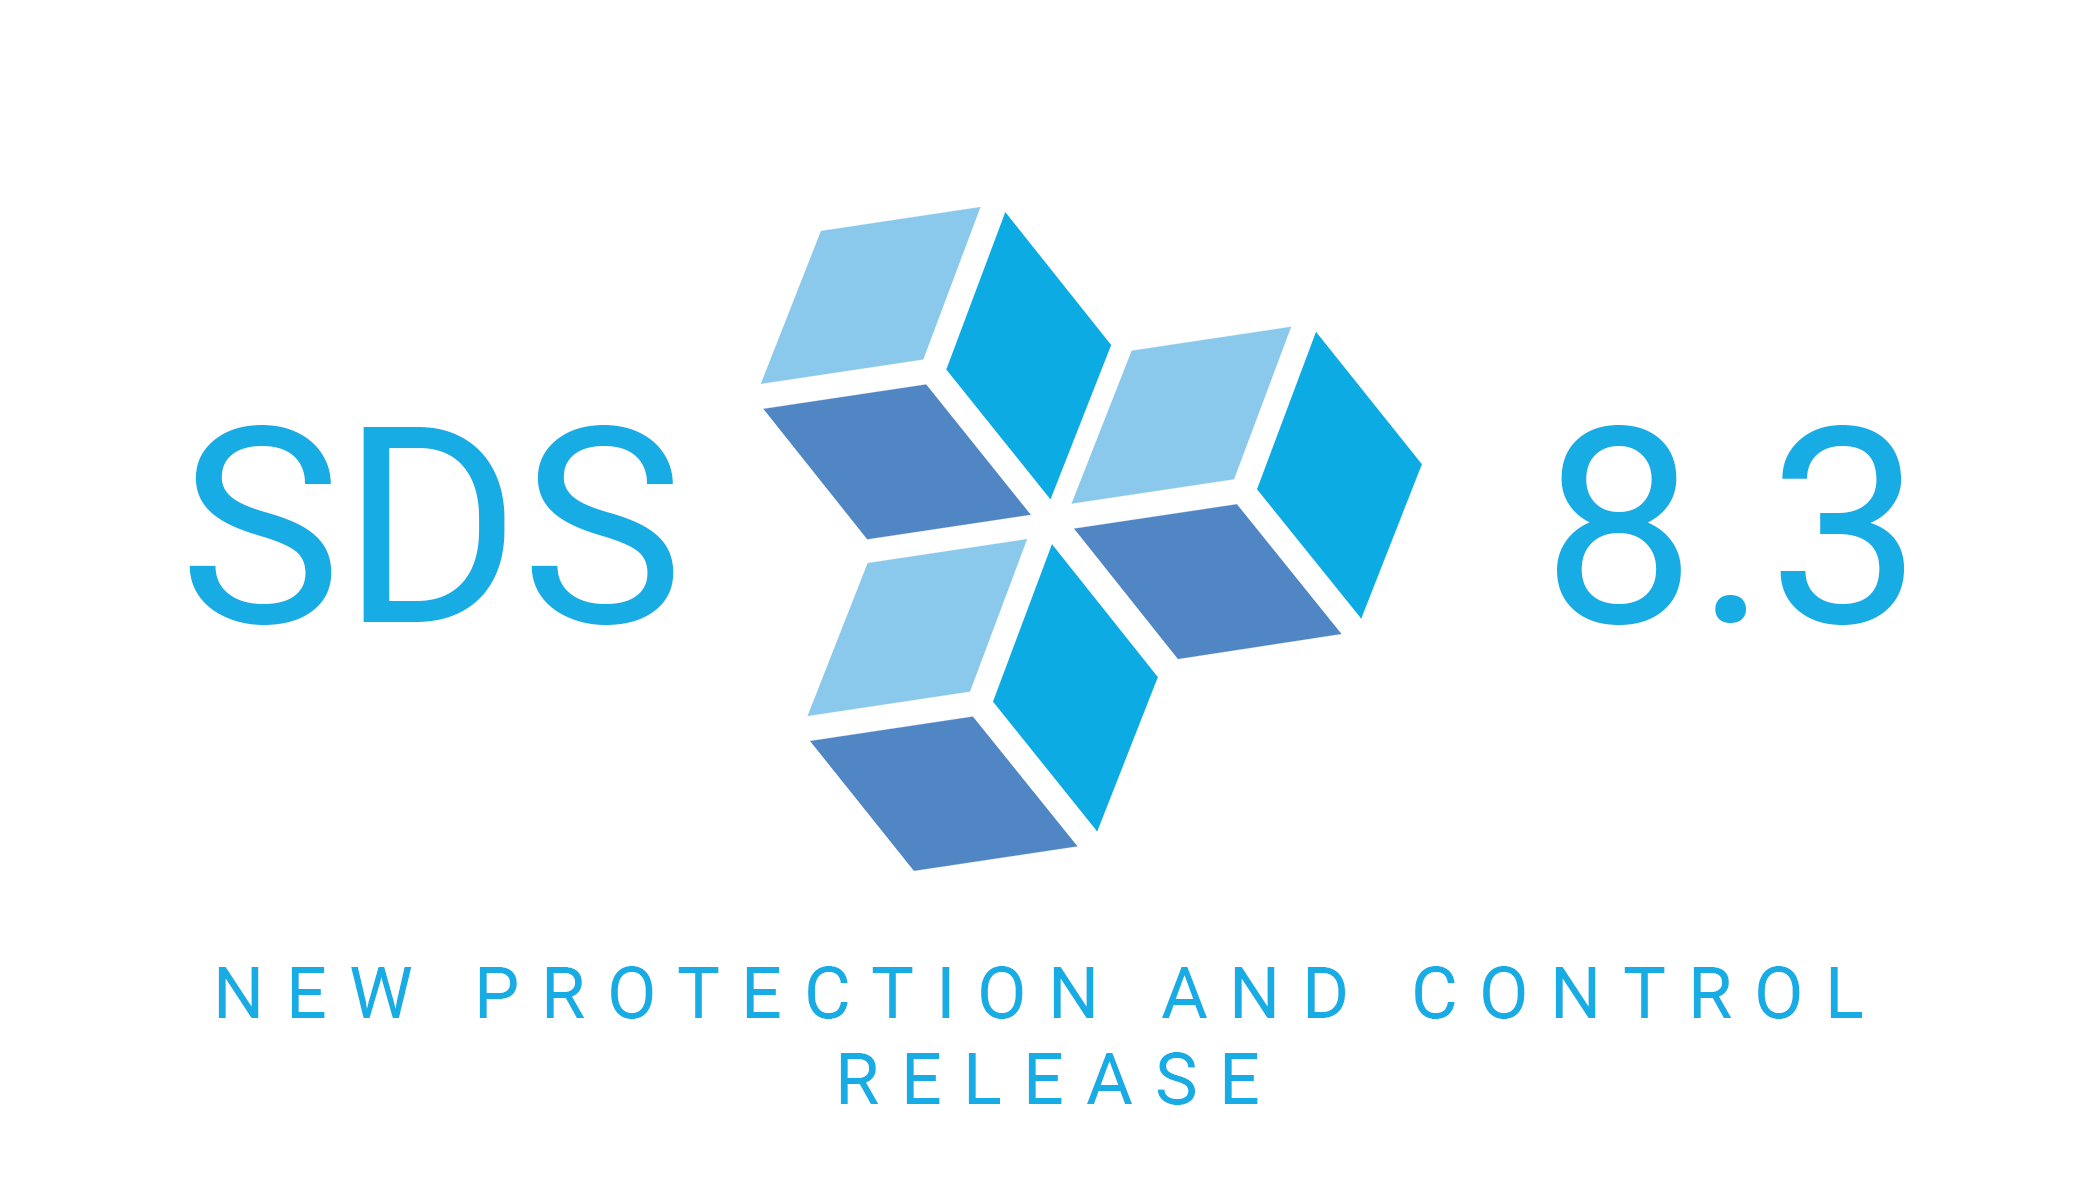 New Protection and Control Release